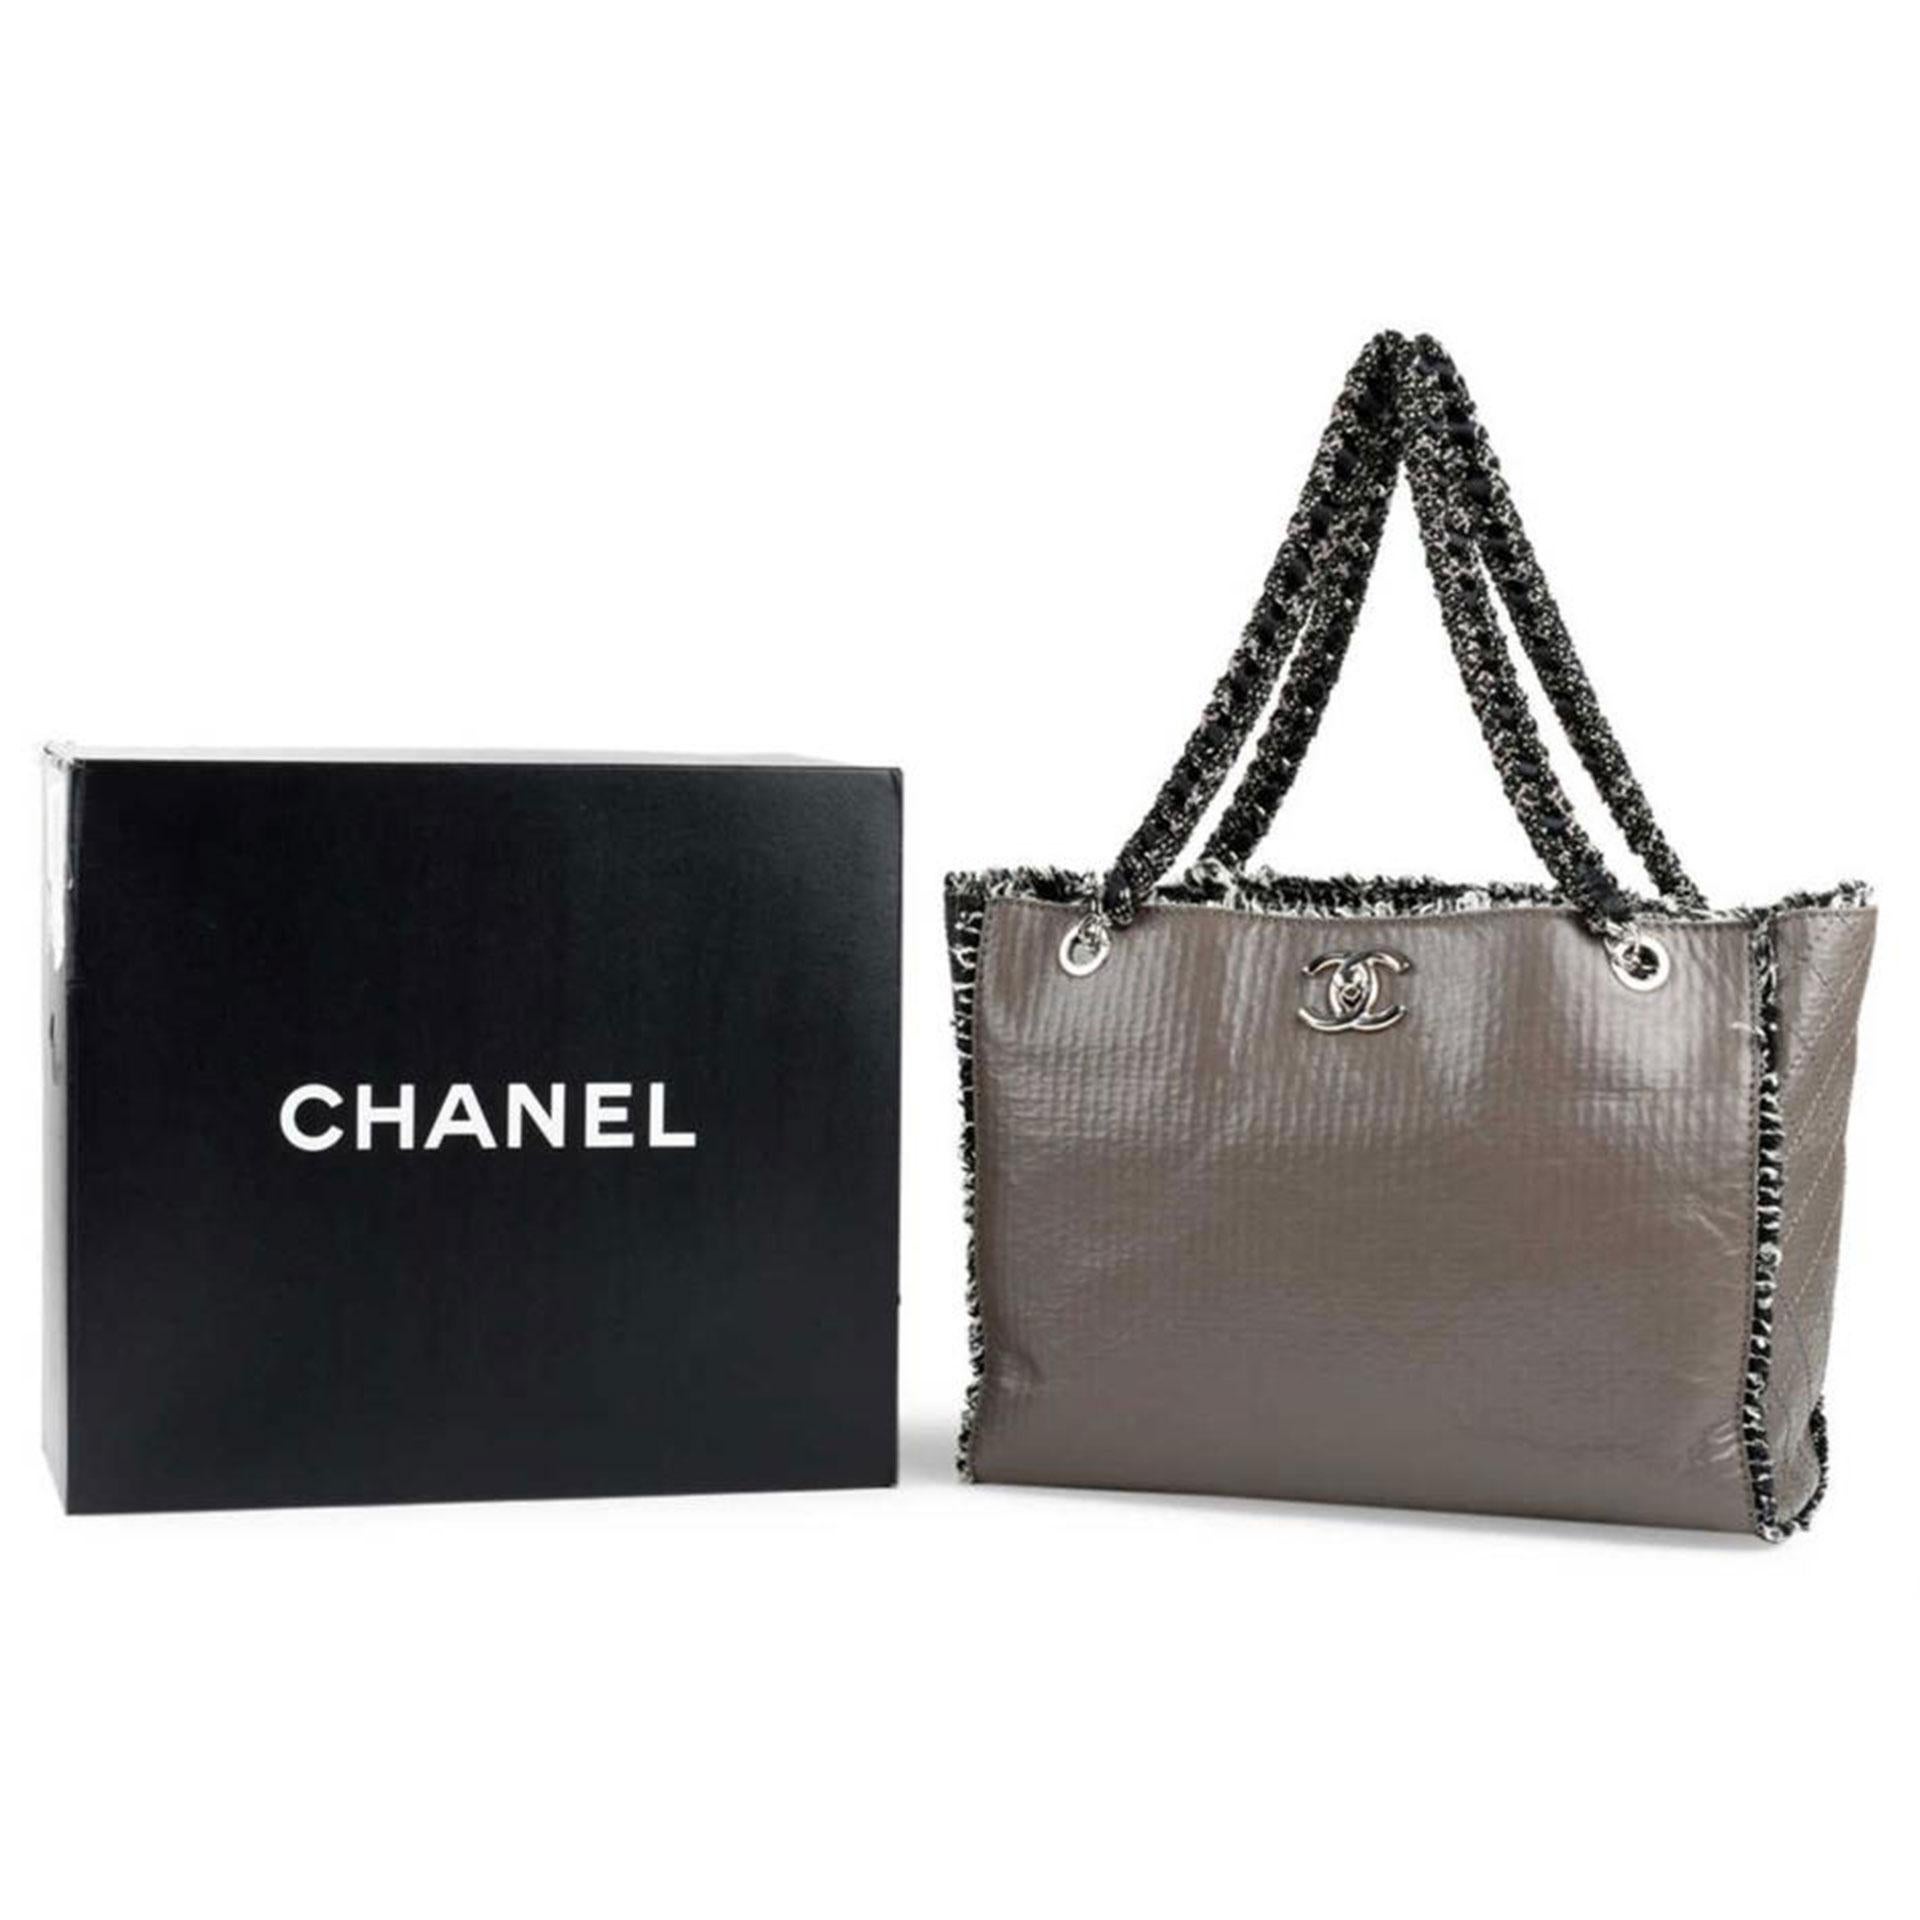 Chanel 2009 Taupe Beige Tweed Fringe and Calfskin Limited Edition Beige Tote Bag For Sale 4